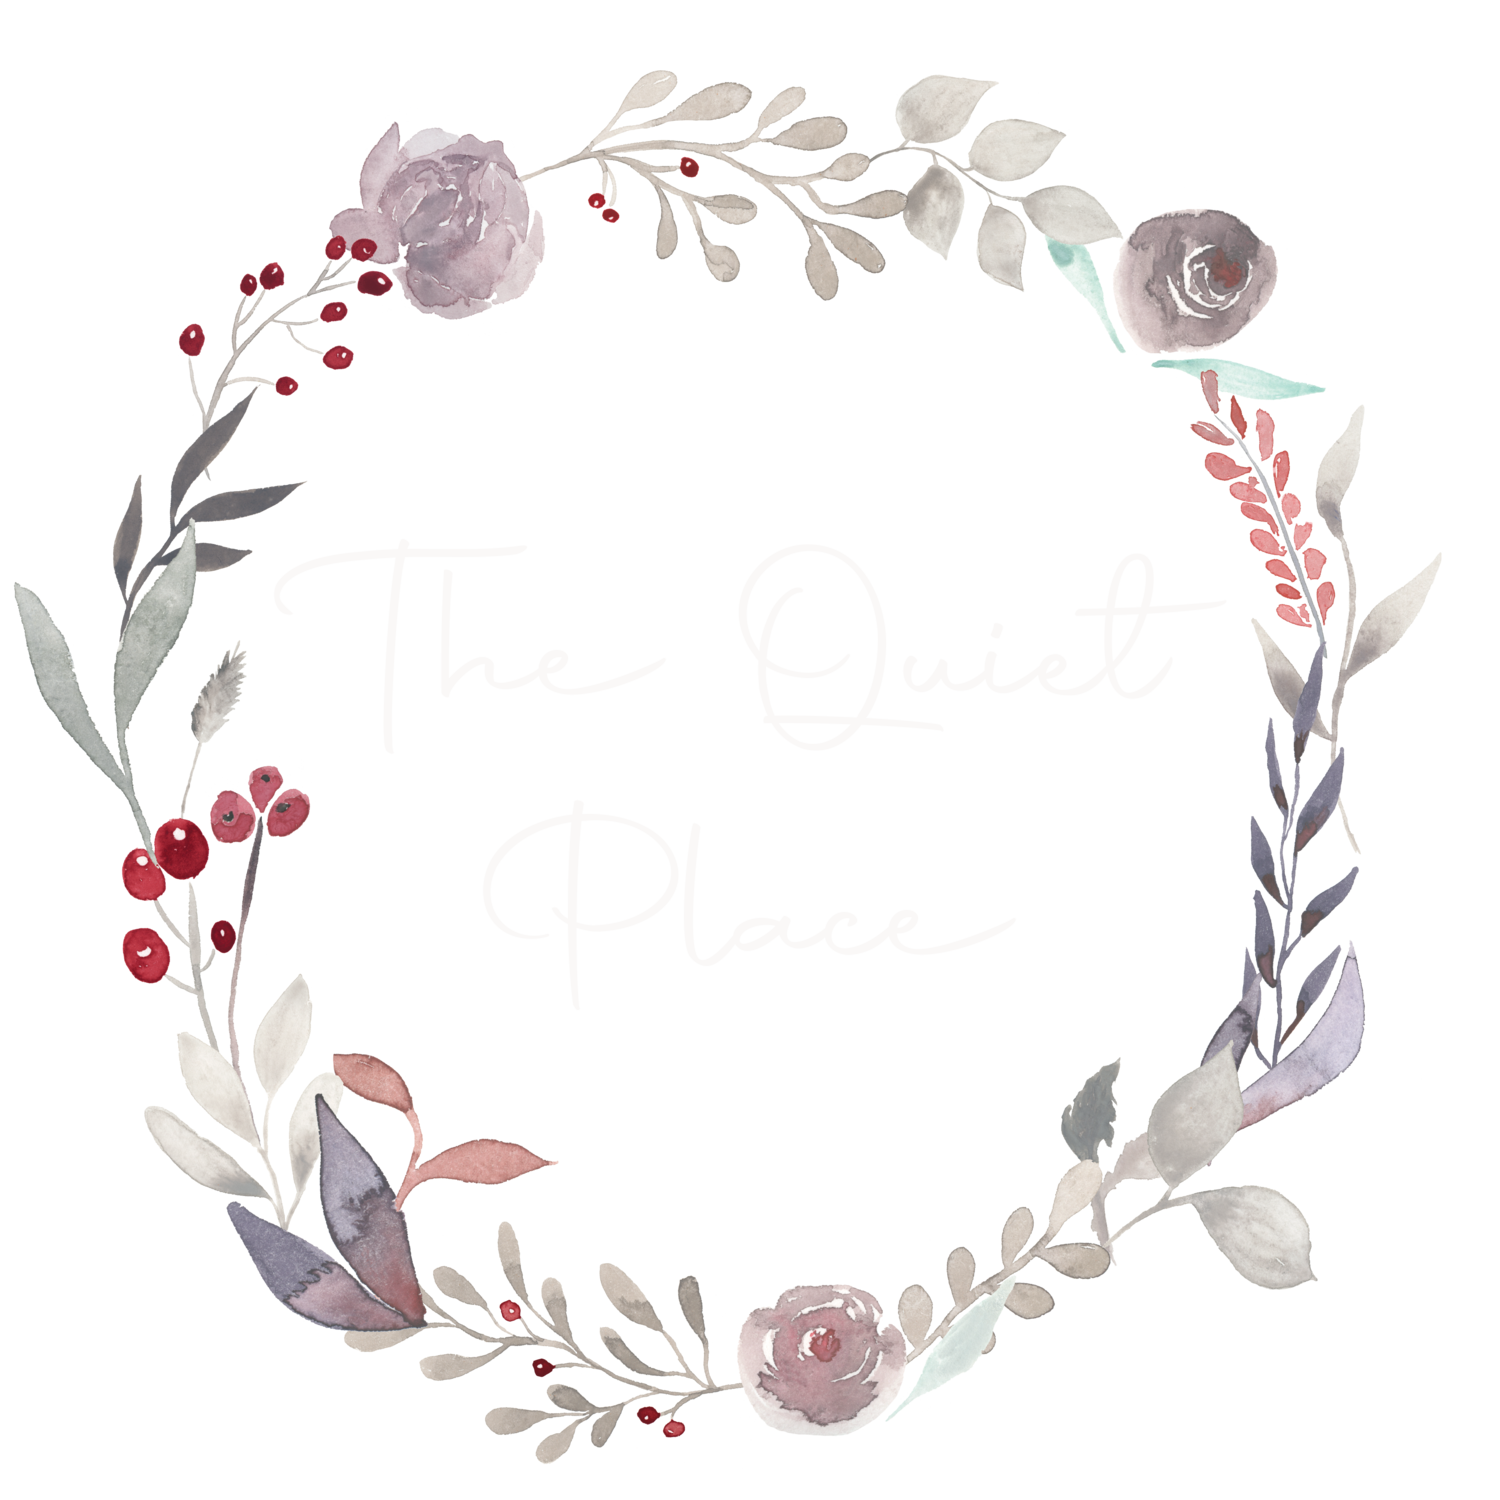 The Quiet Place - Therapeutic counselling